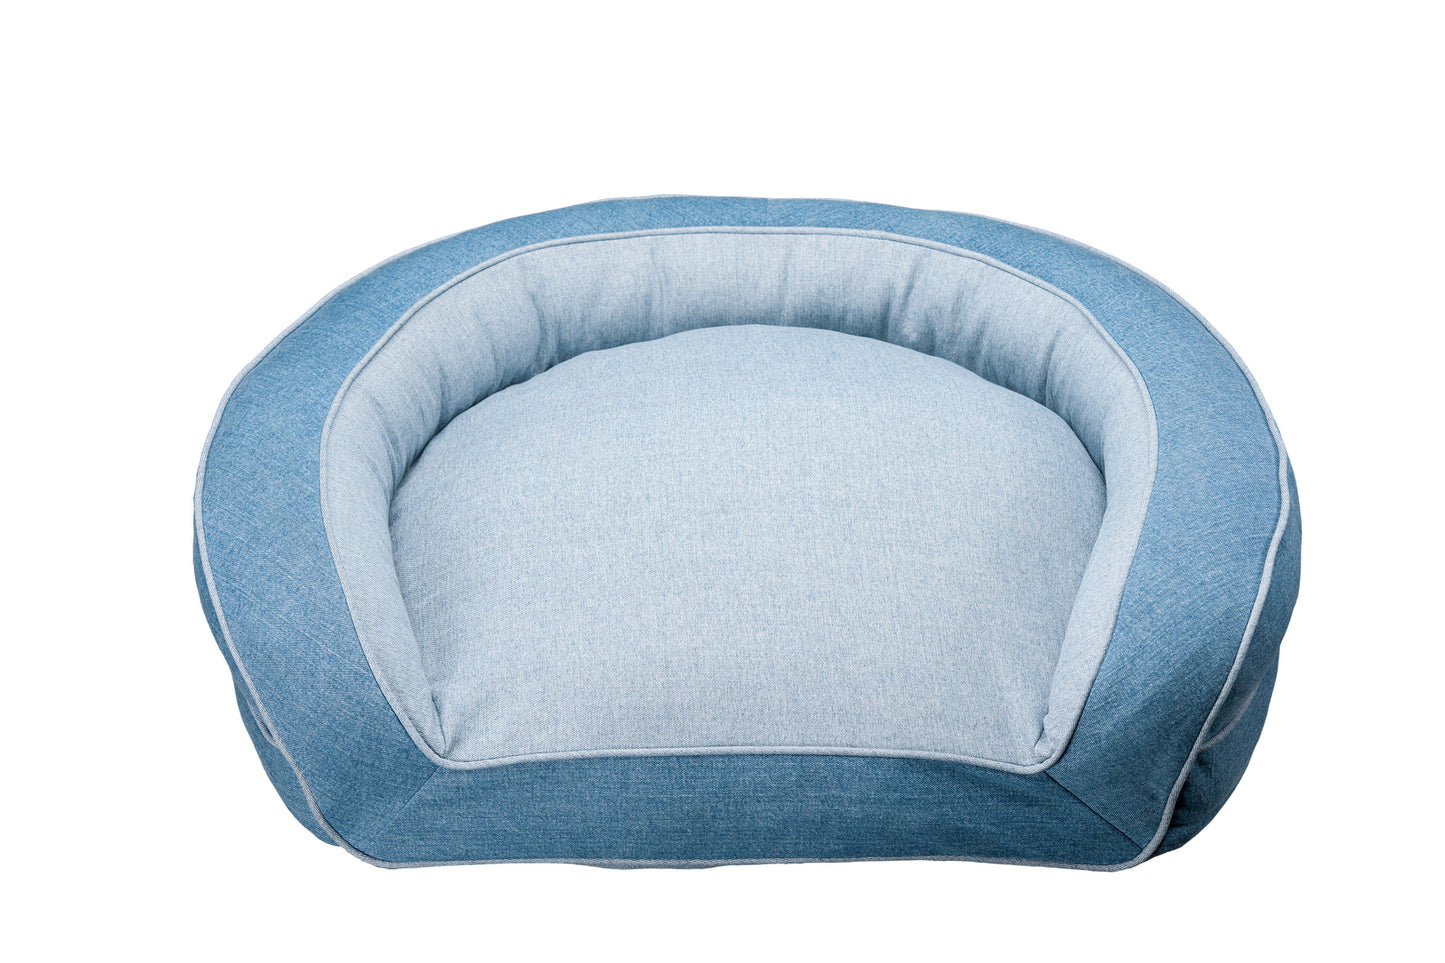 Blue Jean Horseshoe Couch